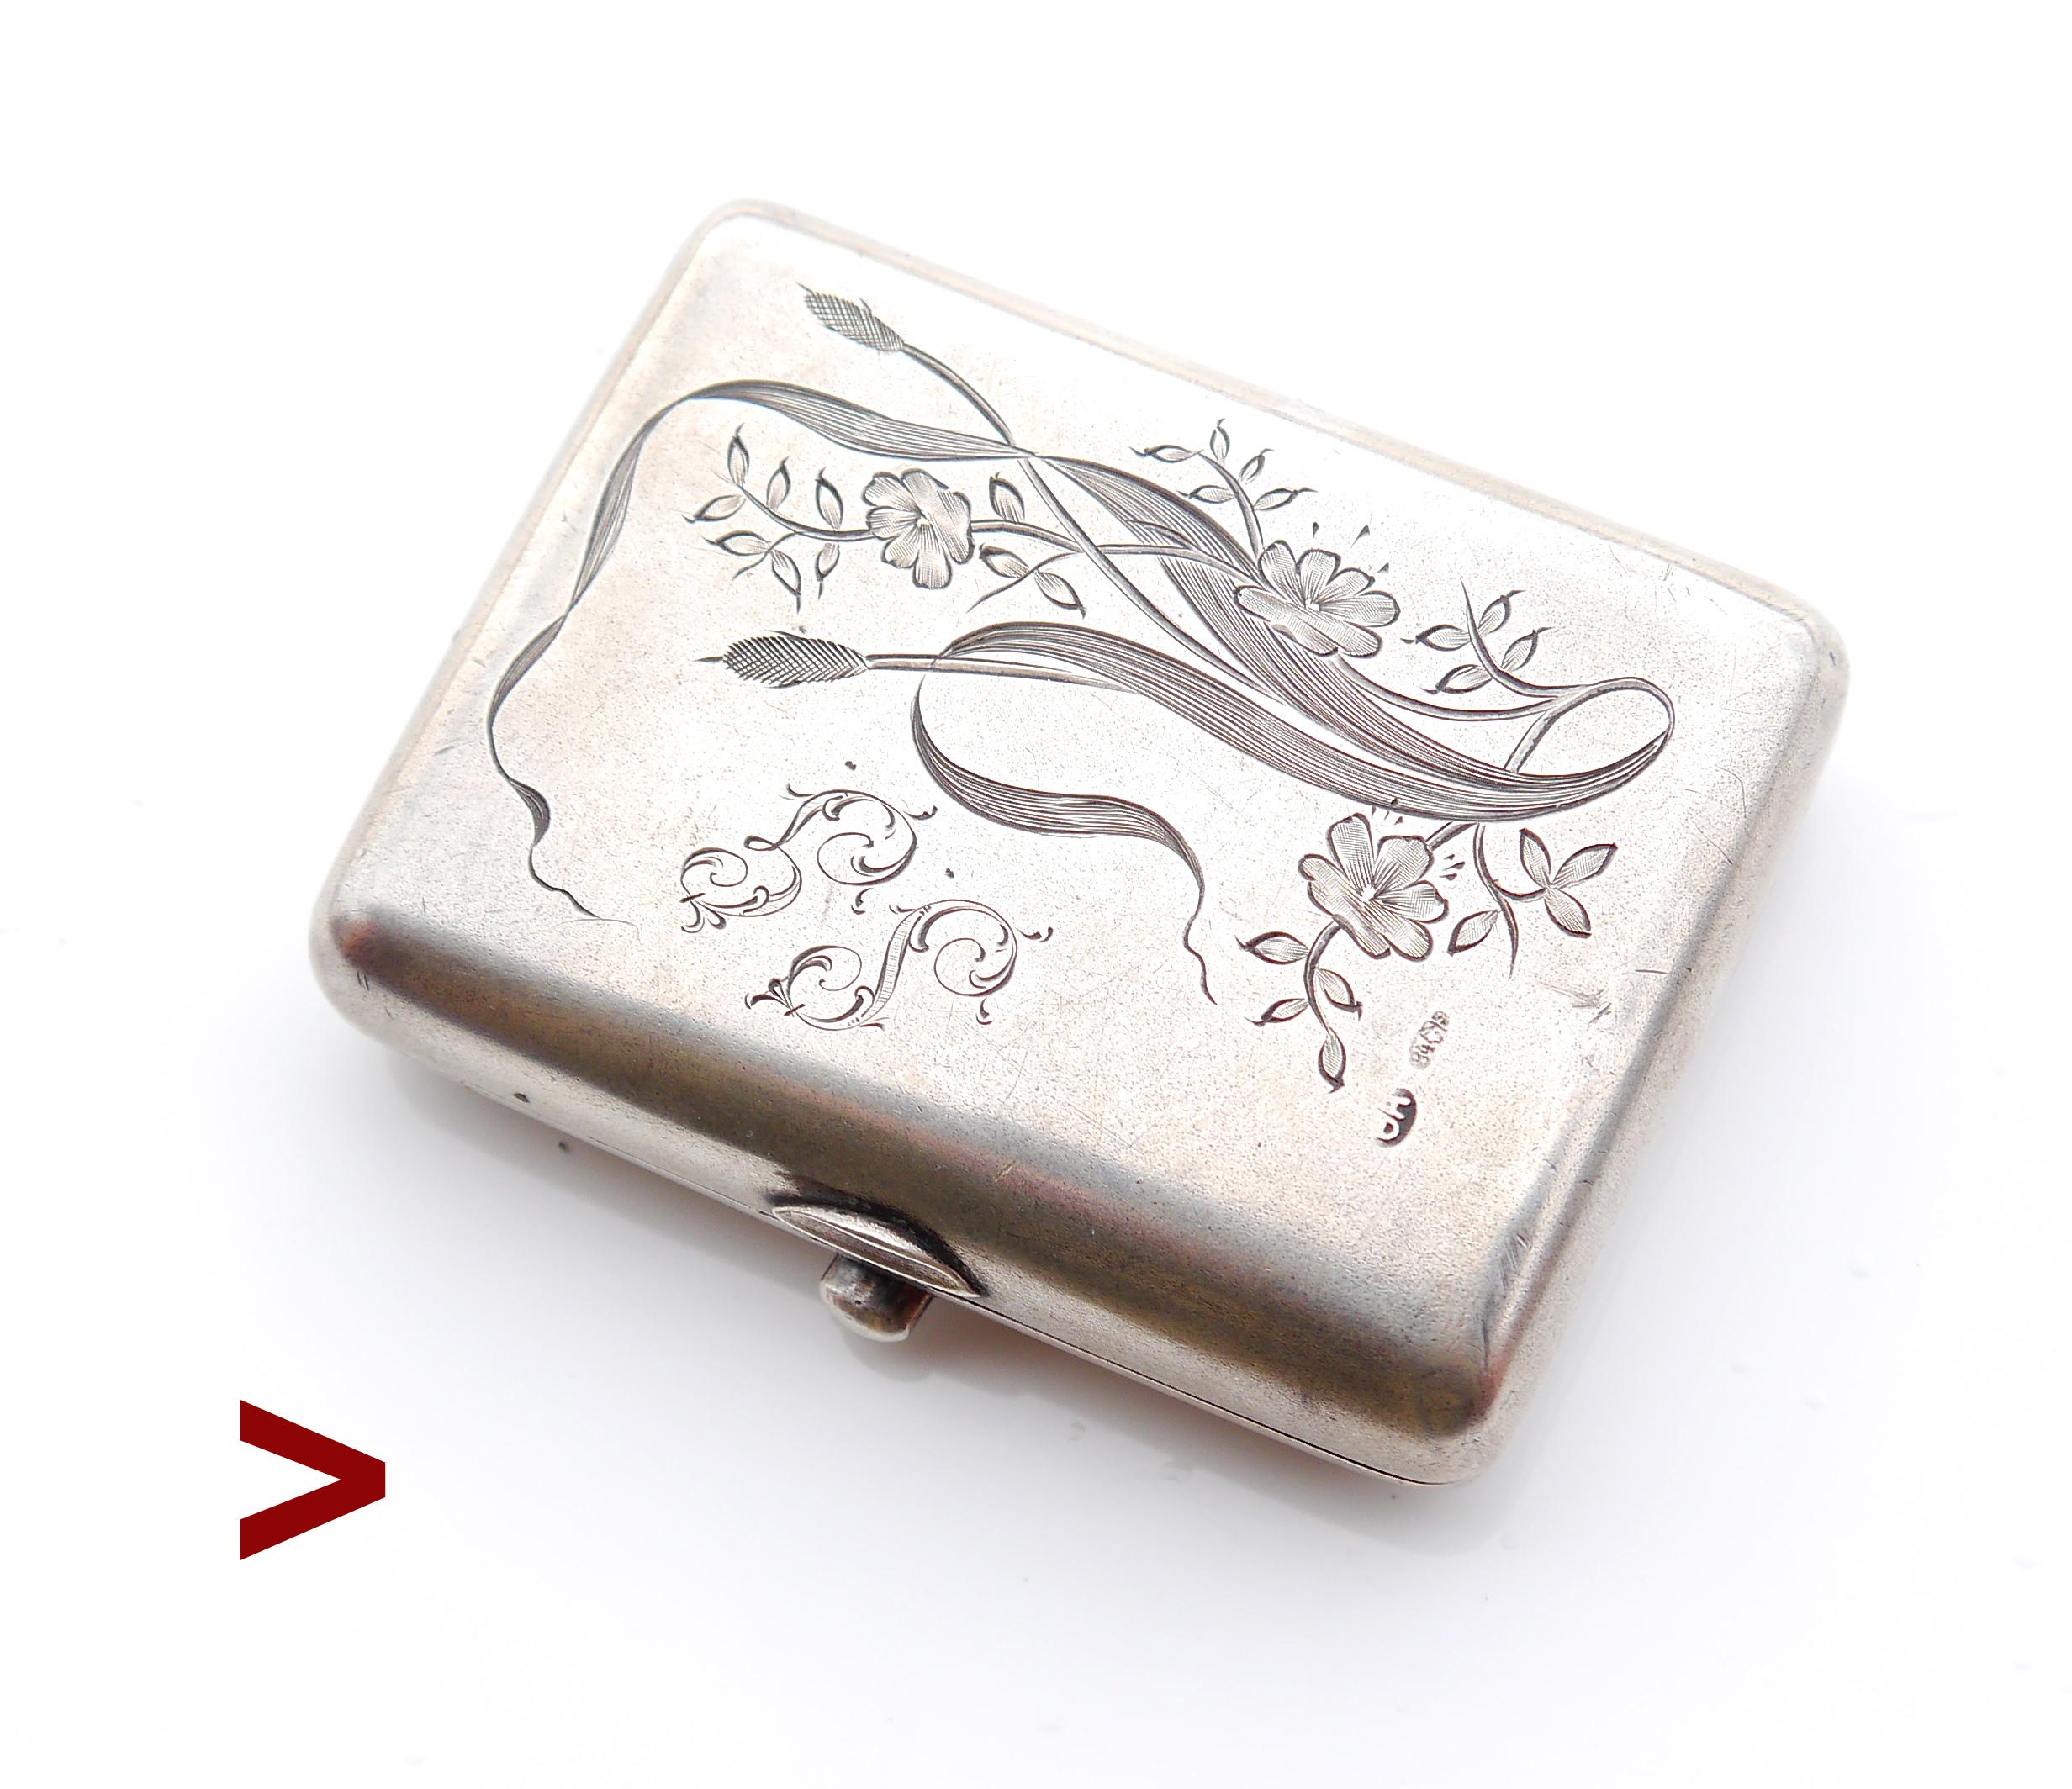 Early XX century Art Nouveau Russian Silver box with fine floral hand-engraved decor and two-letters monogram on the lid.

Rectangular form with rounded corners, hallmarked with Russian 84 zolotniks silver mark, maker marks BA /  Василий Агафонов /